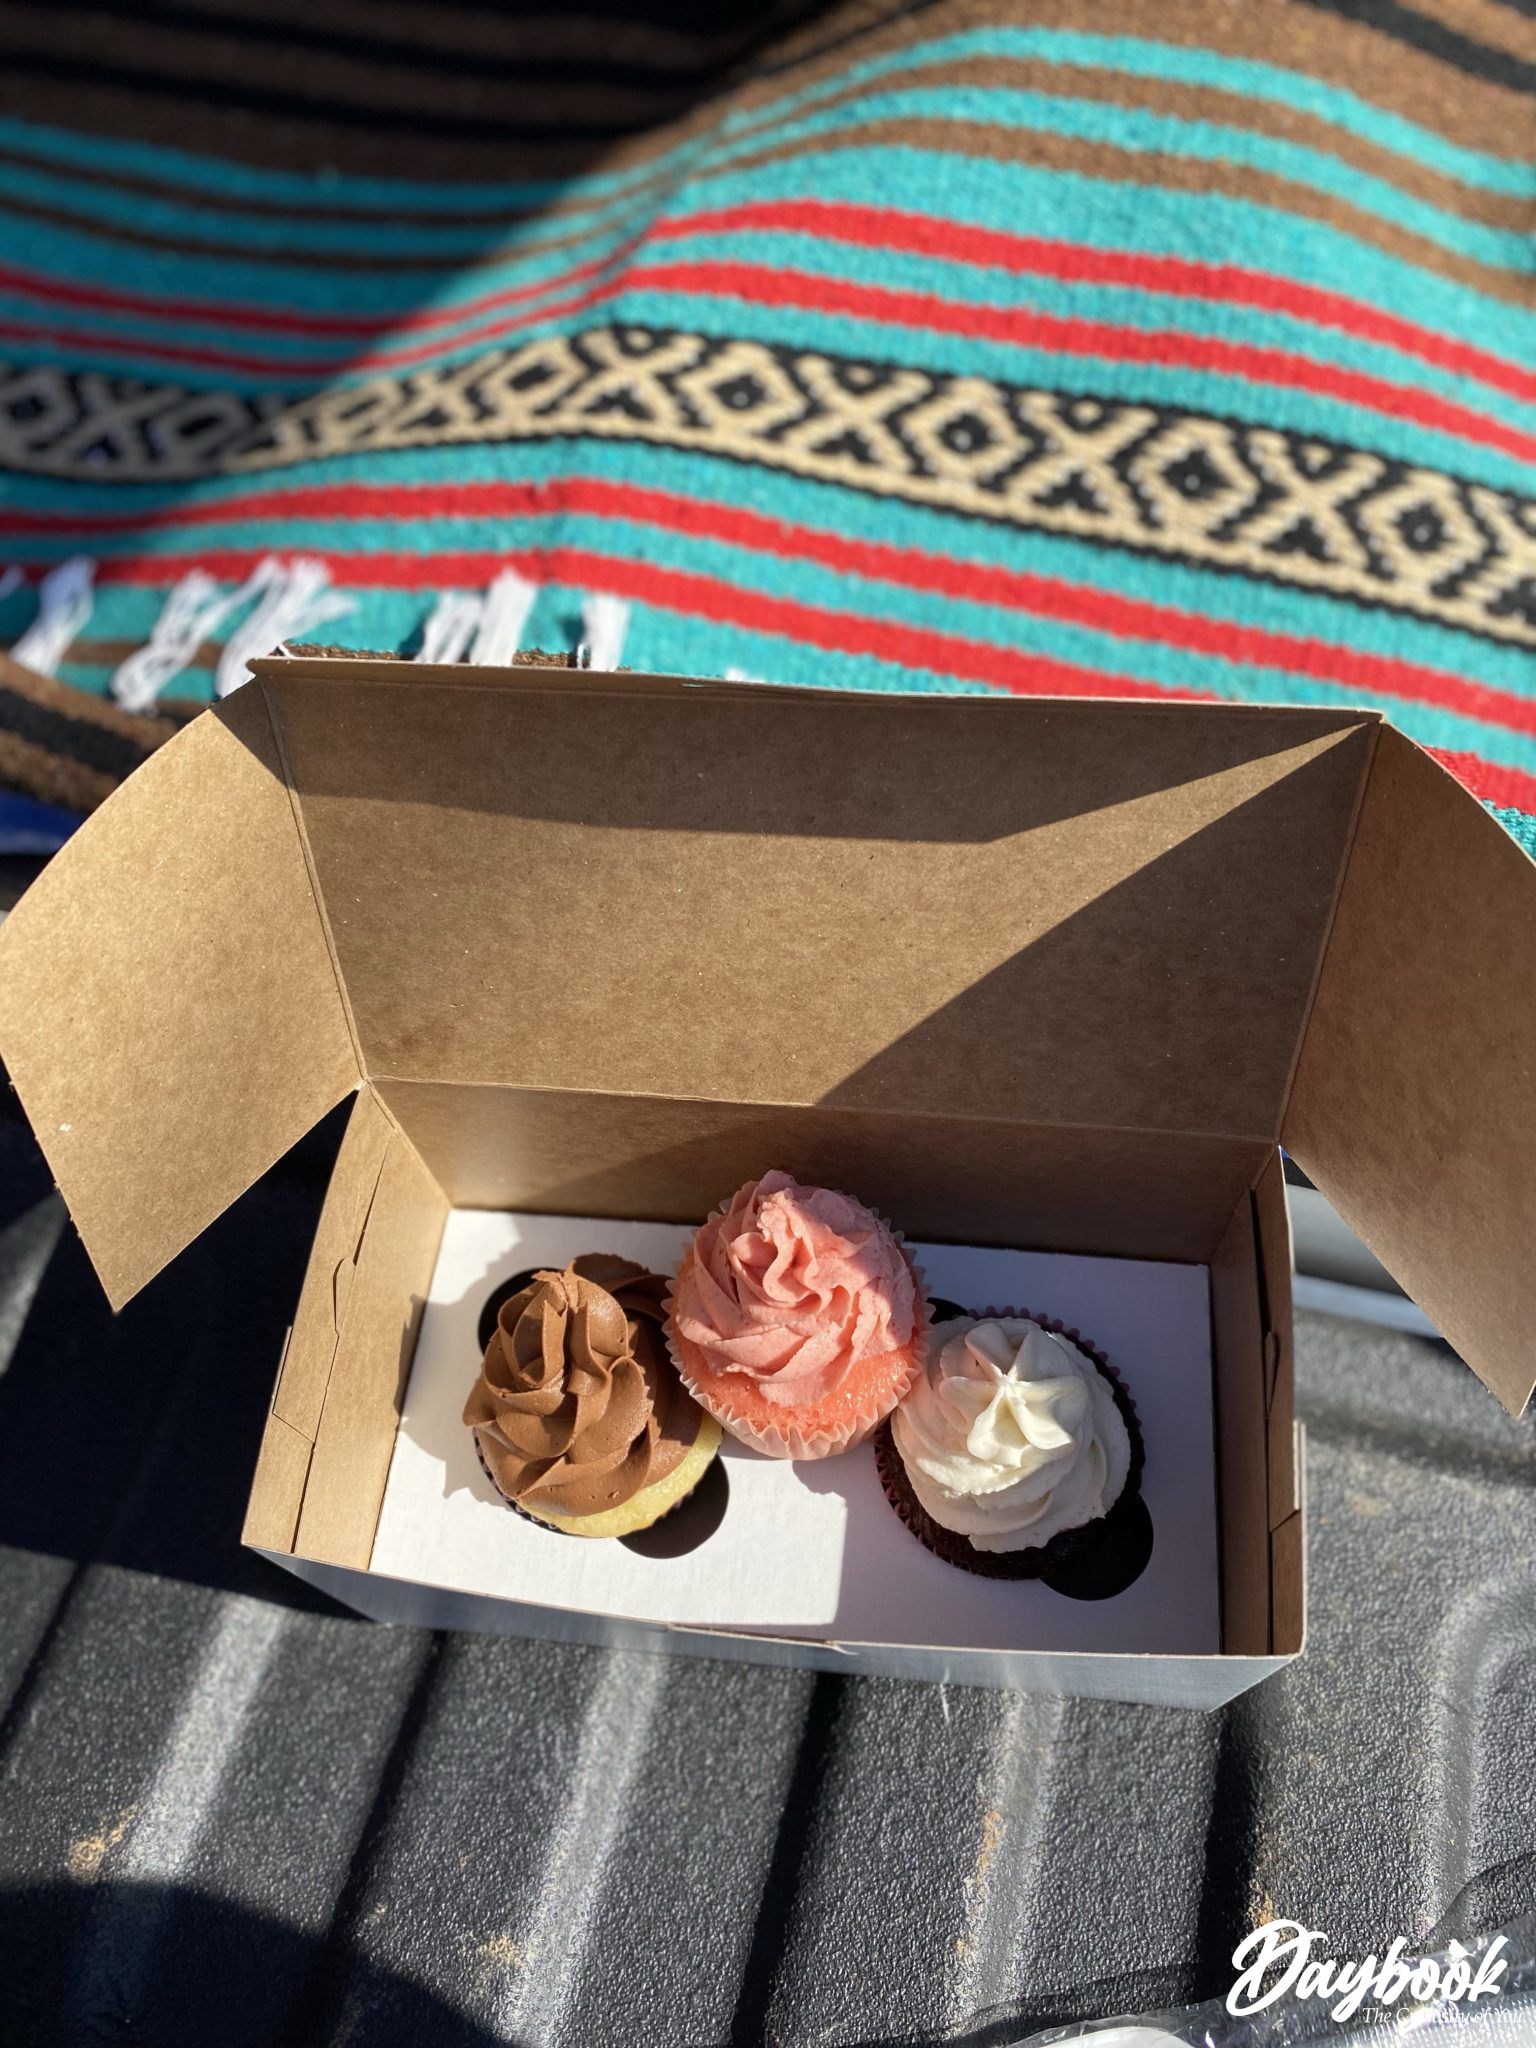 cupcakes in a bakery box